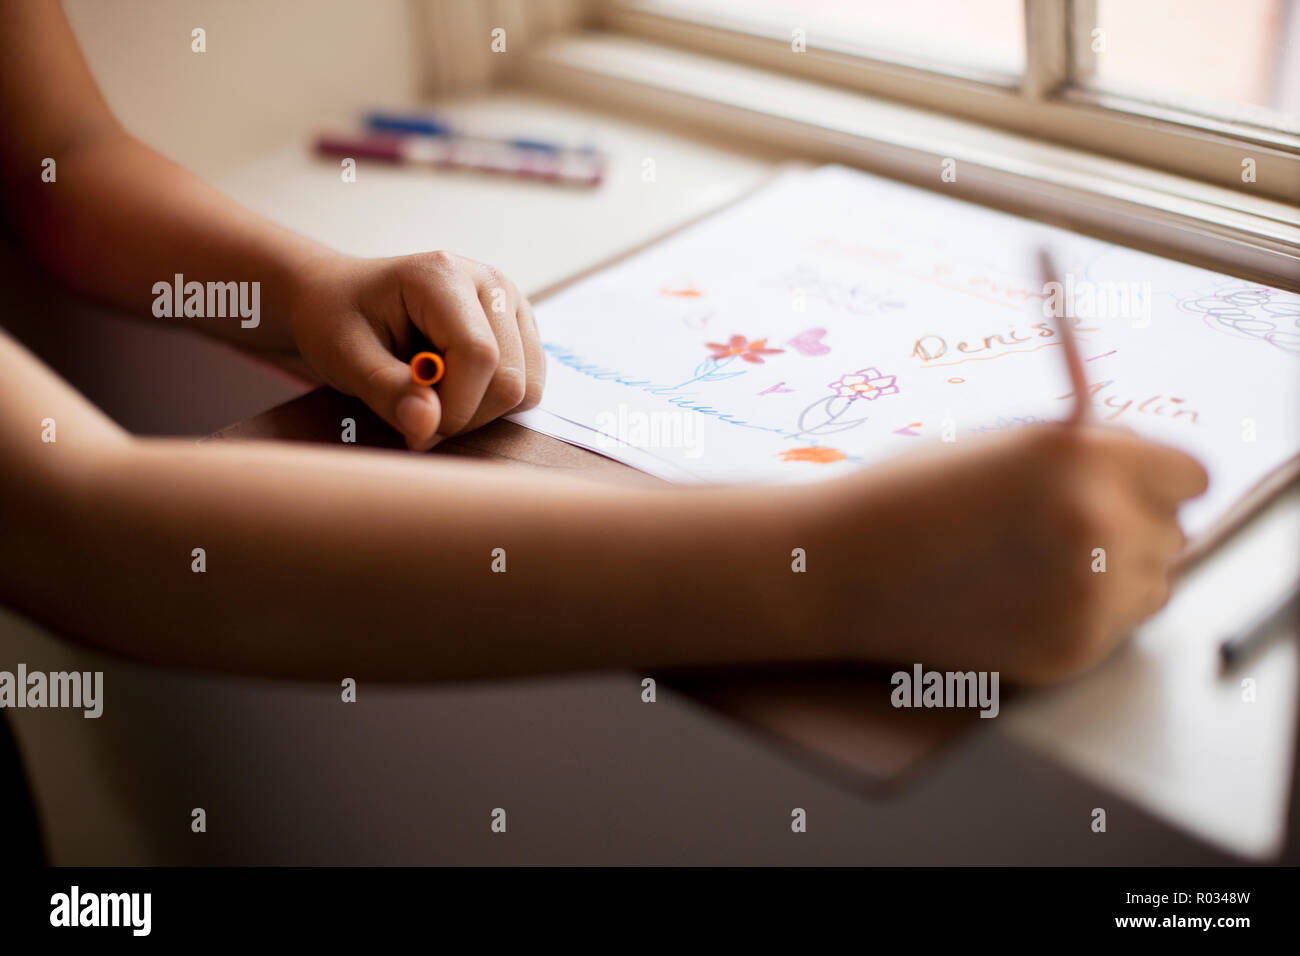 Hands on a school girl coloring in a book. Stock Photo